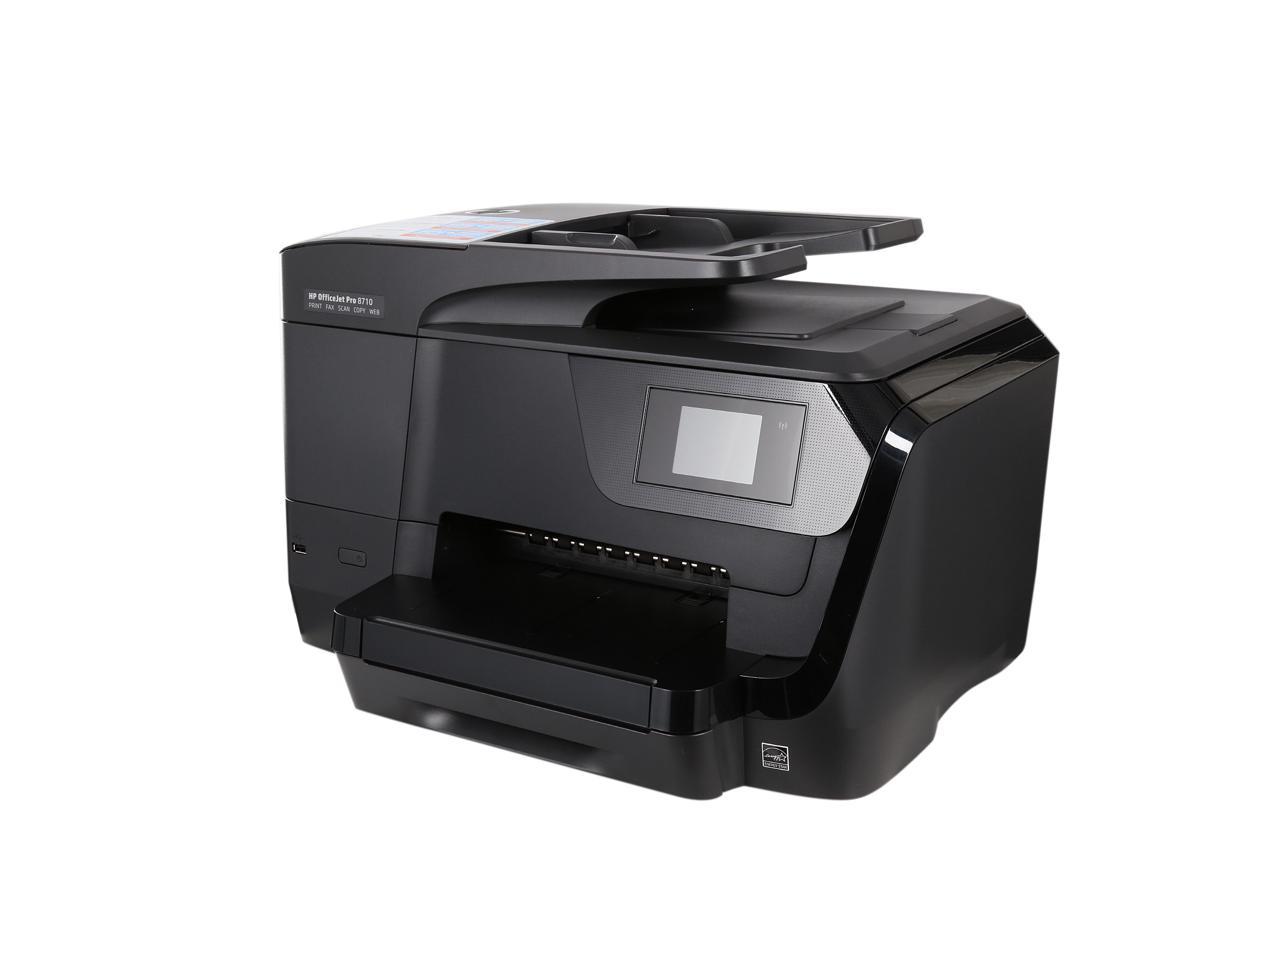 hp officejet pro 8710 printer driver for mac